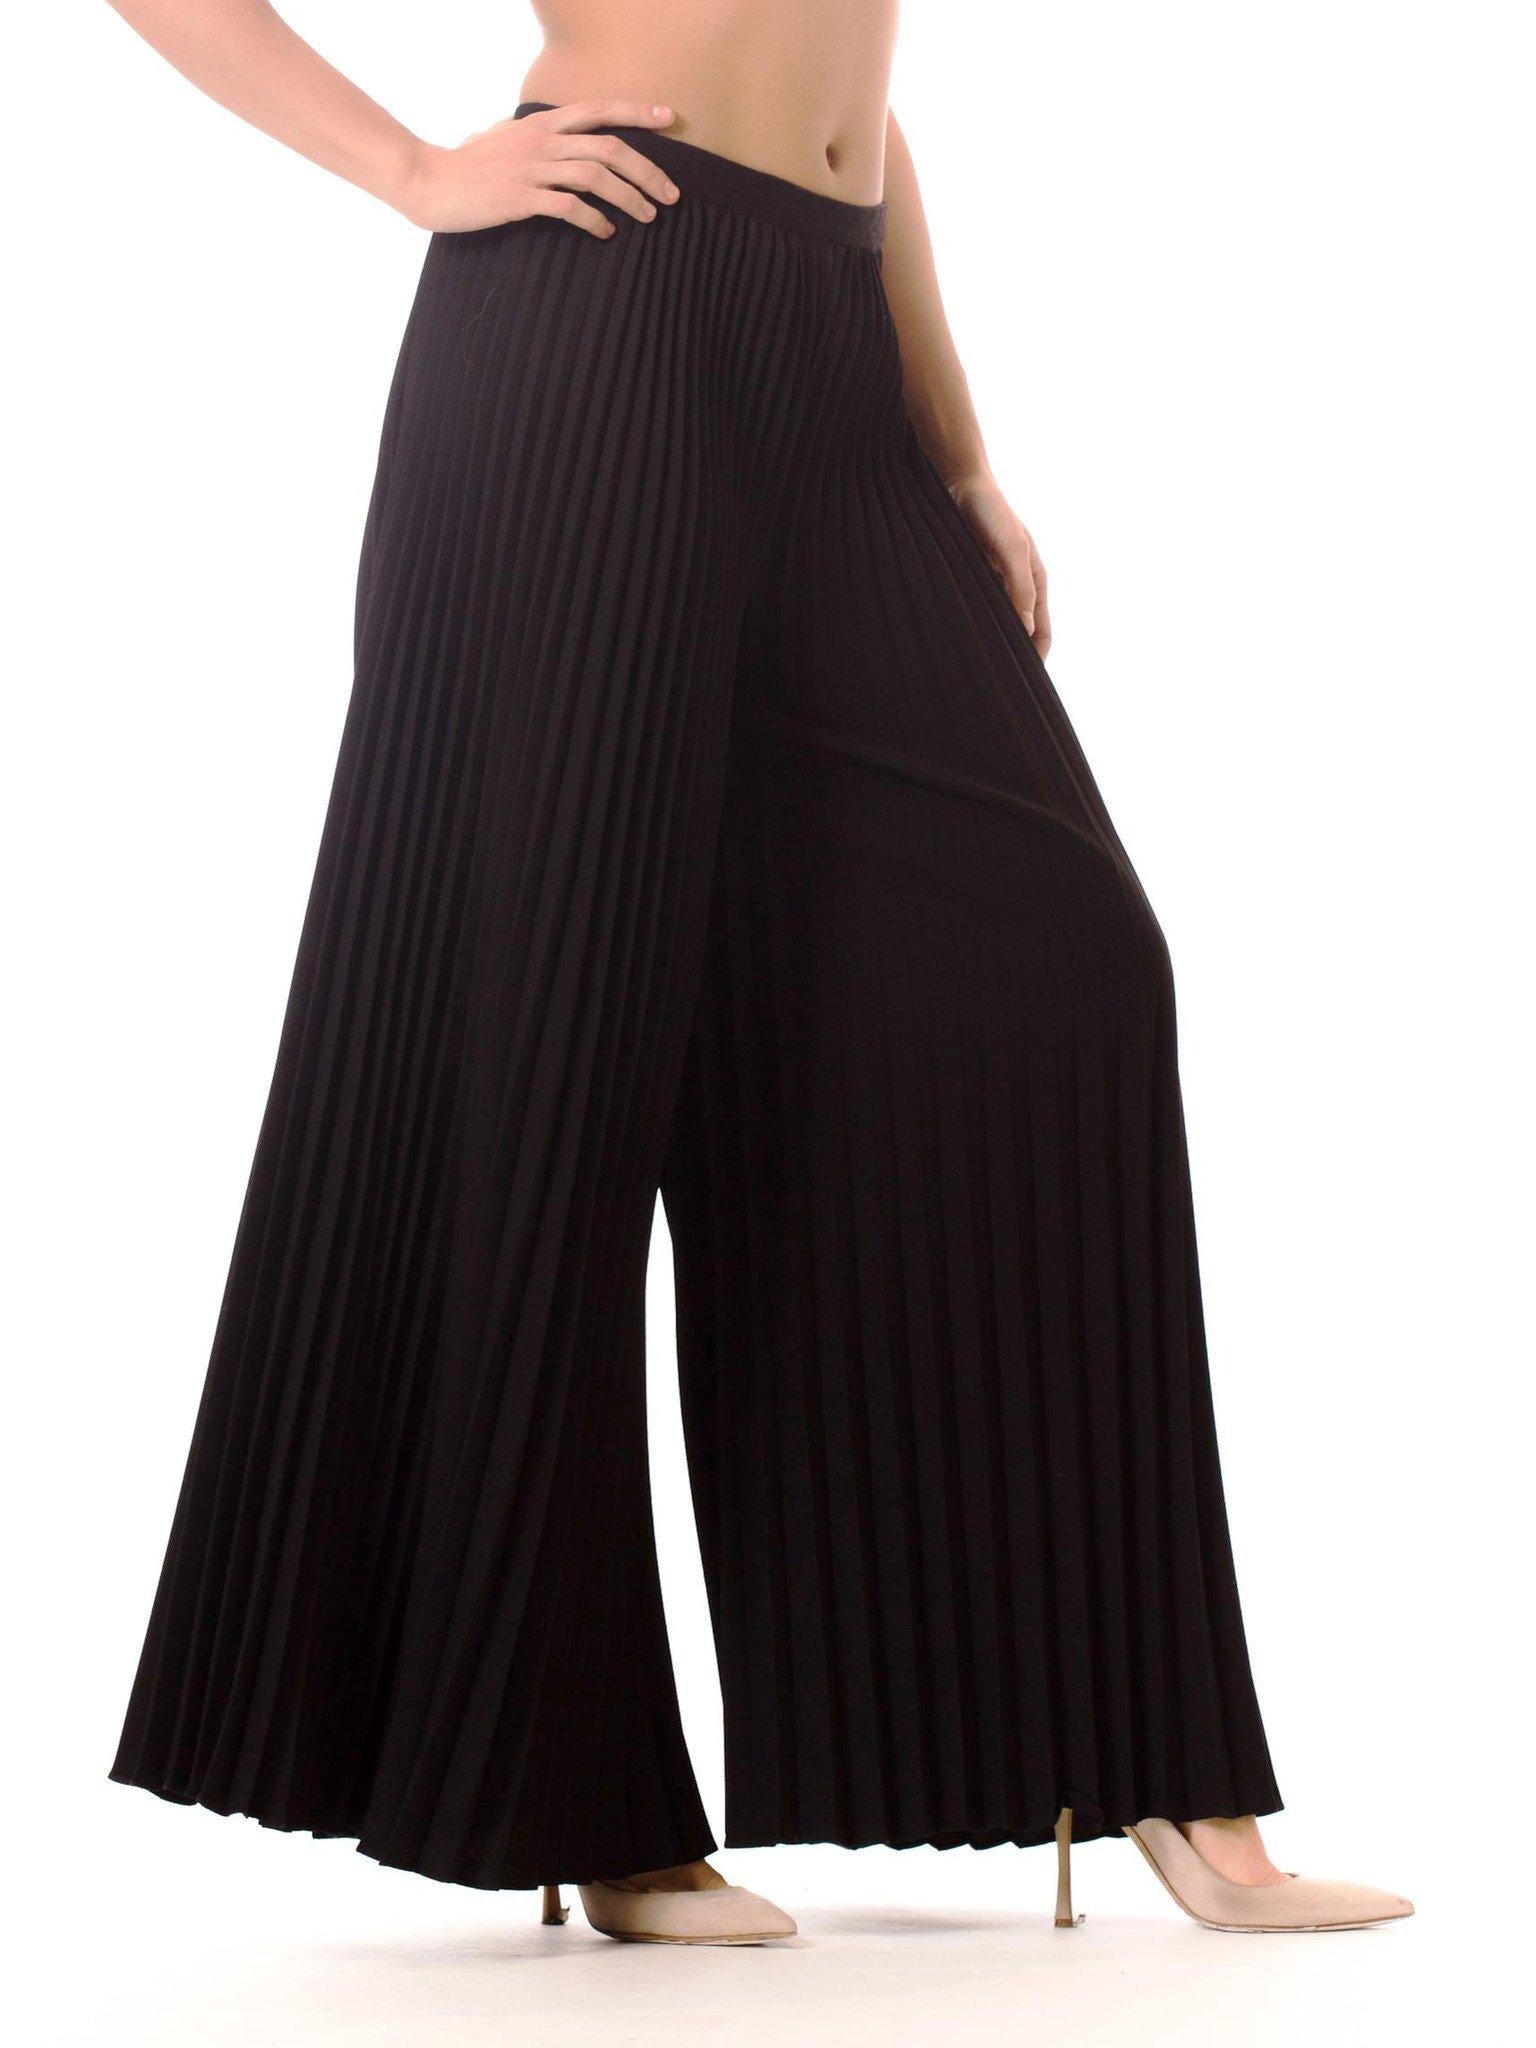 1970S Polyester  Funky And Chic These Black, Wide Leg Pants Feature Tight, Well-Ordered Pleats Down The Entire Length. Rest On Hipline. Design Combined With Long Pleats, Create A Playful Yet Sophisticated Garment. Back Zip Closure.